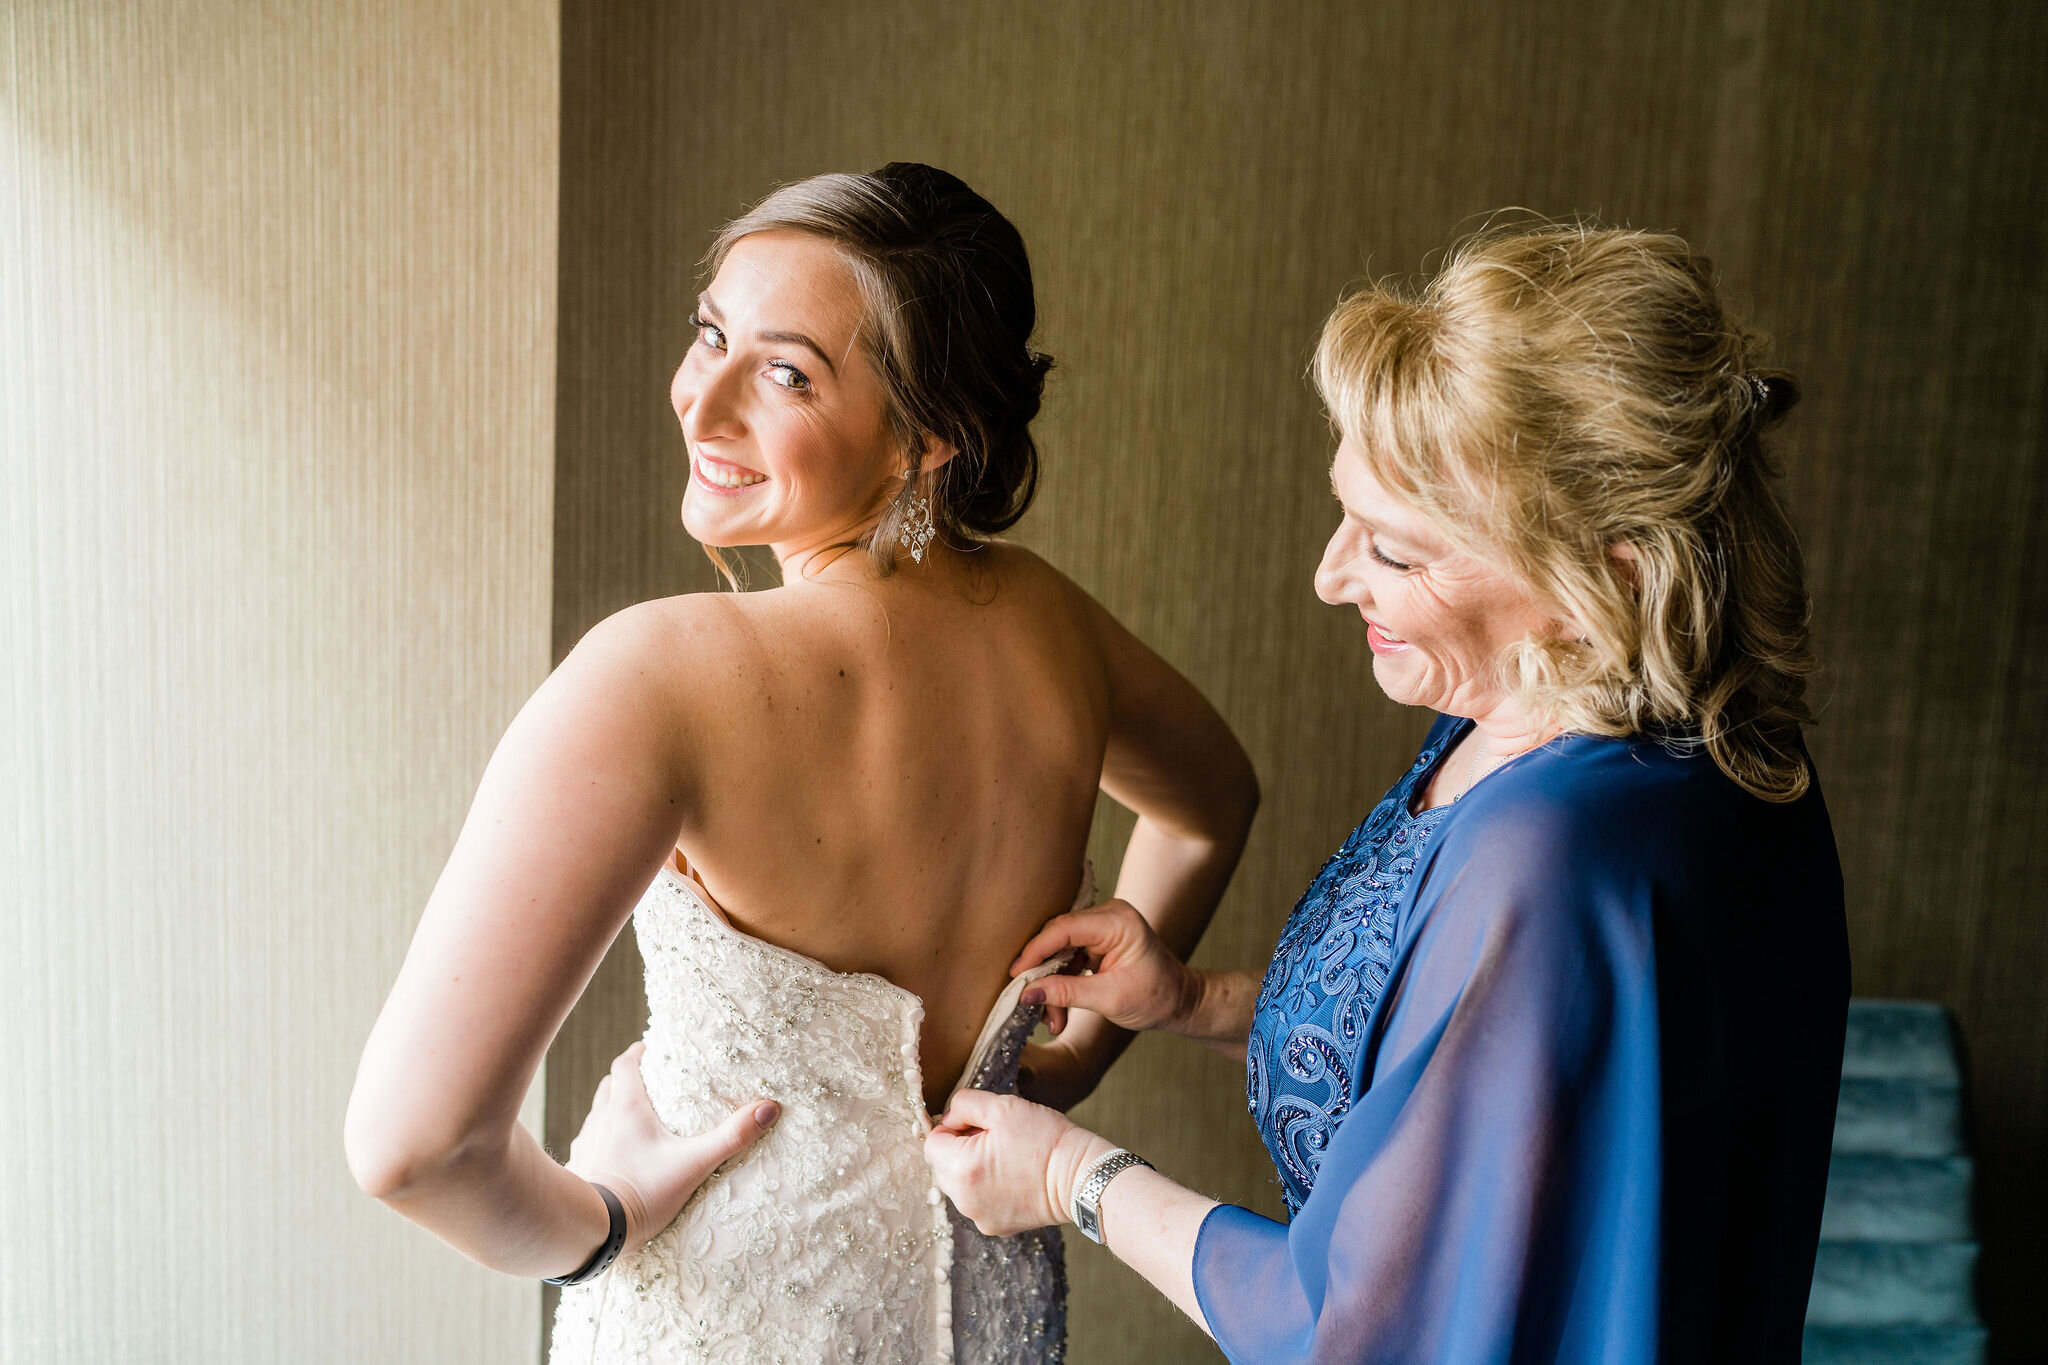 Mother of the bride zipping up bride's dress